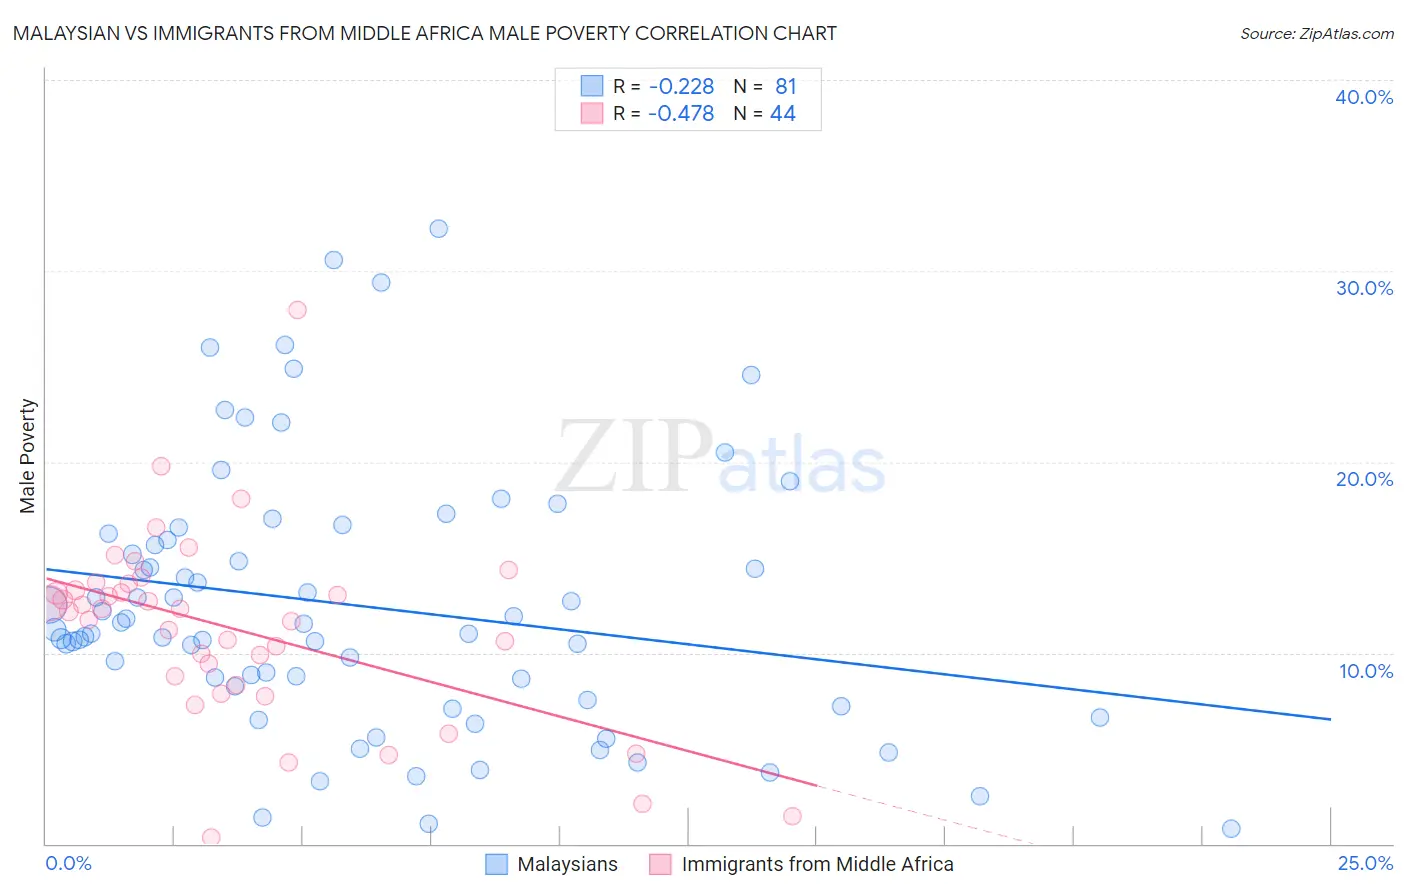 Malaysian vs Immigrants from Middle Africa Male Poverty